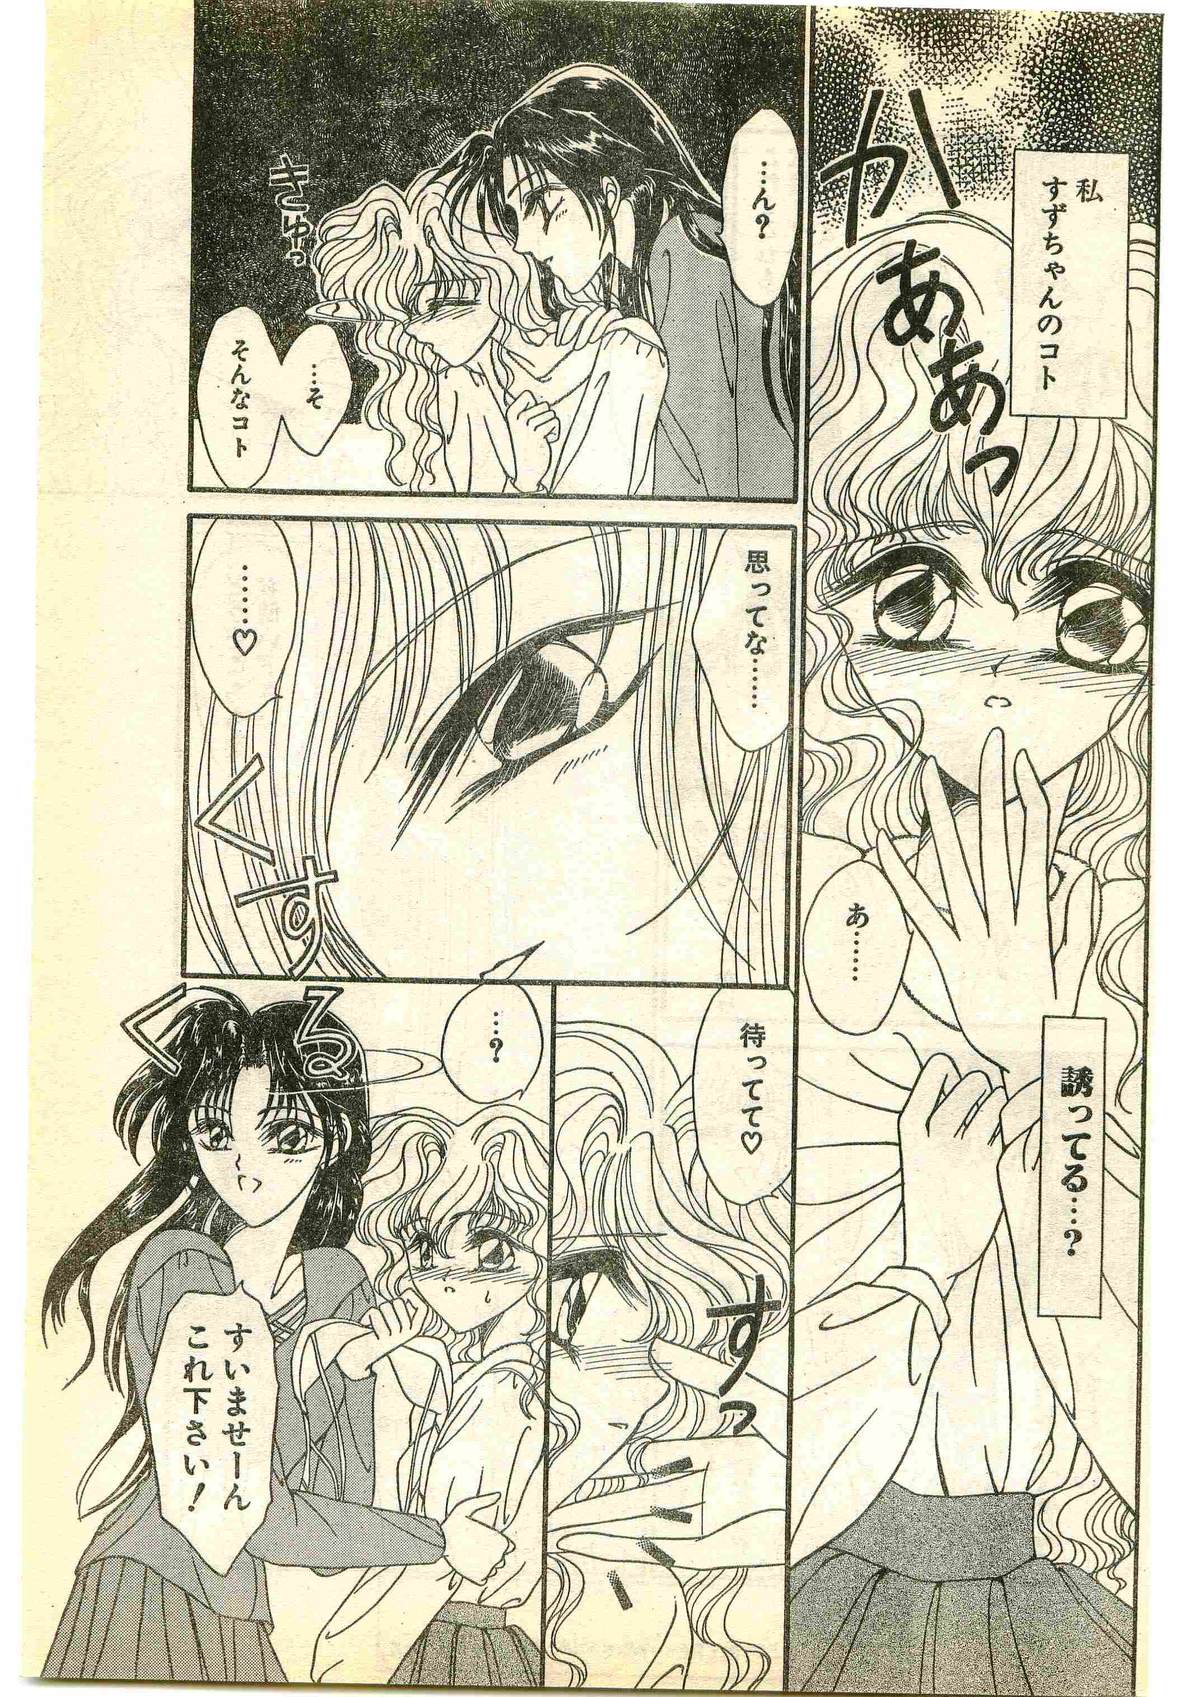 COMIC Papipo Gaiden 1995-01 page 49 full